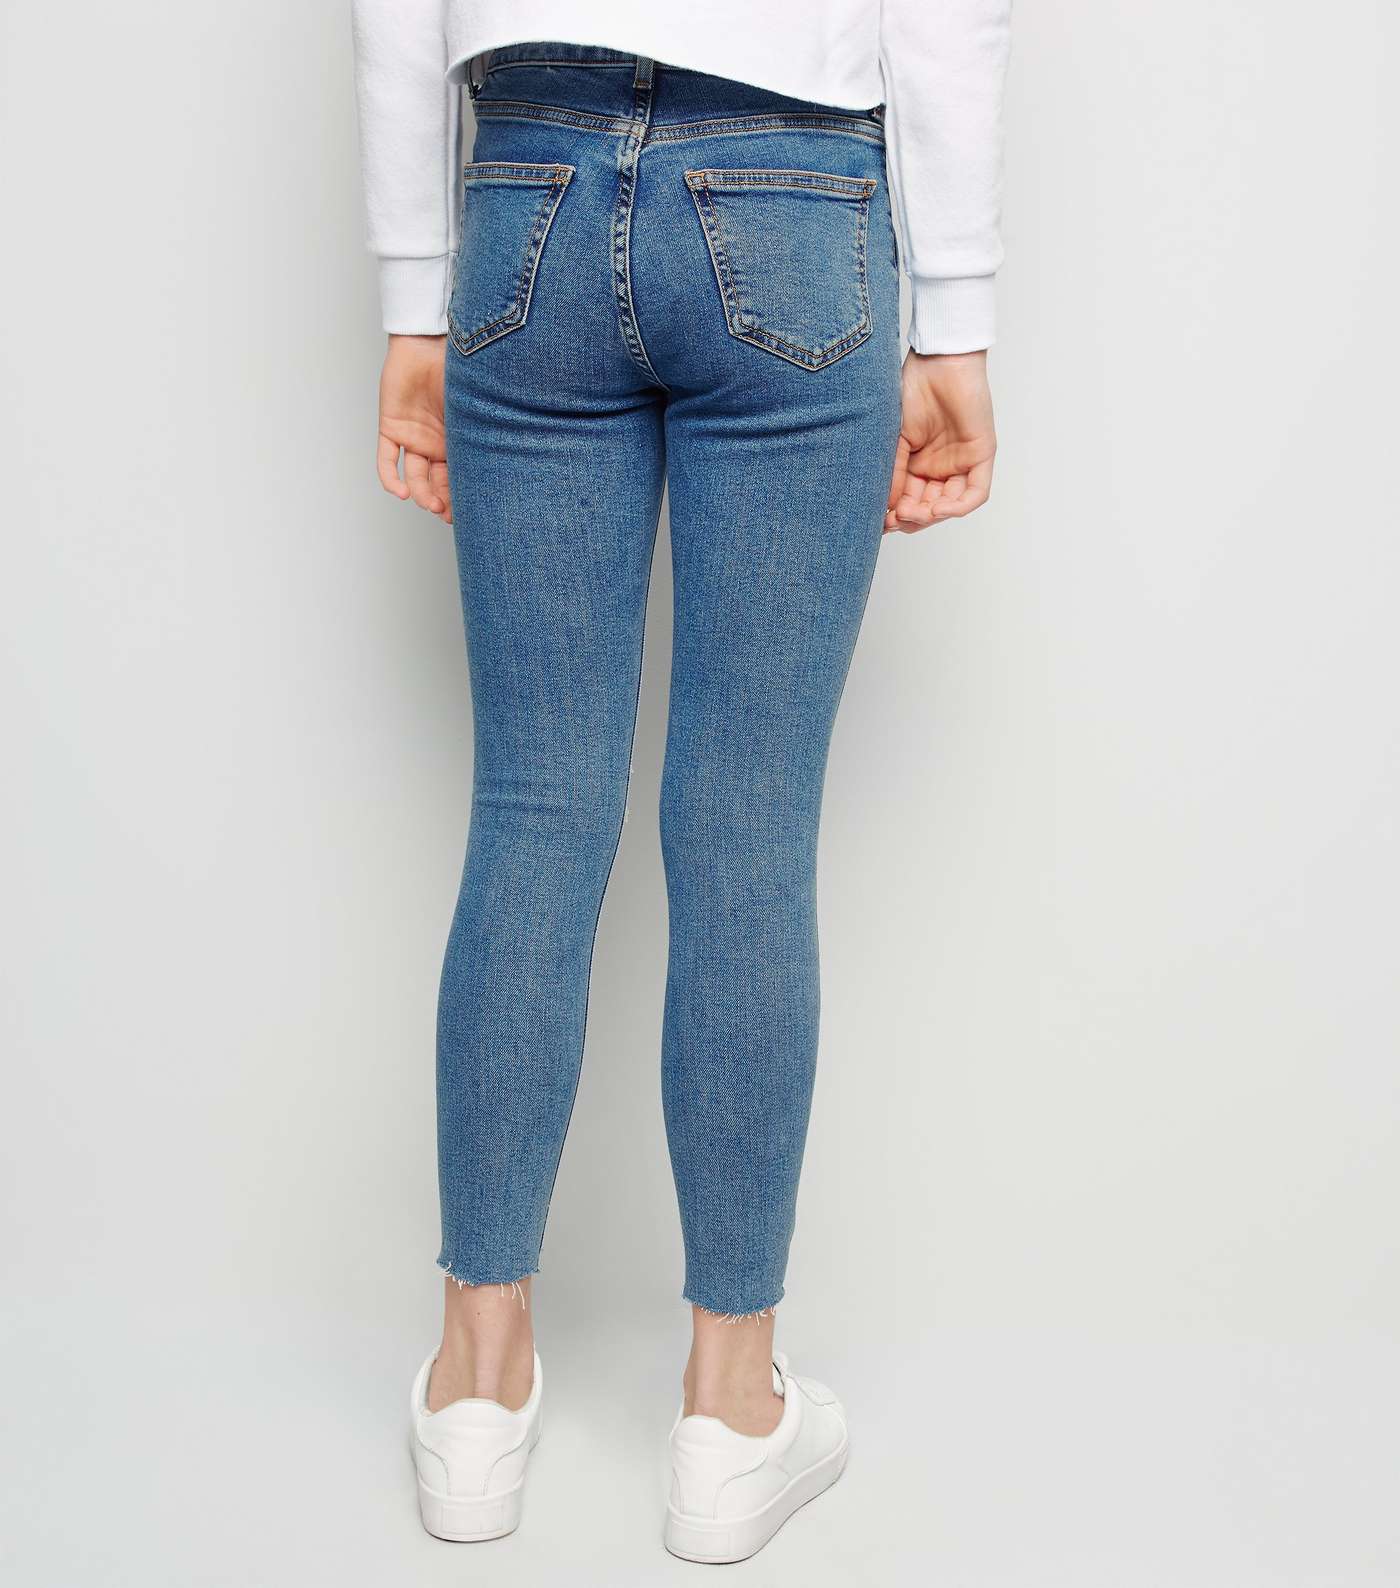 Girls Pale Blue Utility Pocket Ripped Skinny Jeans Image 3